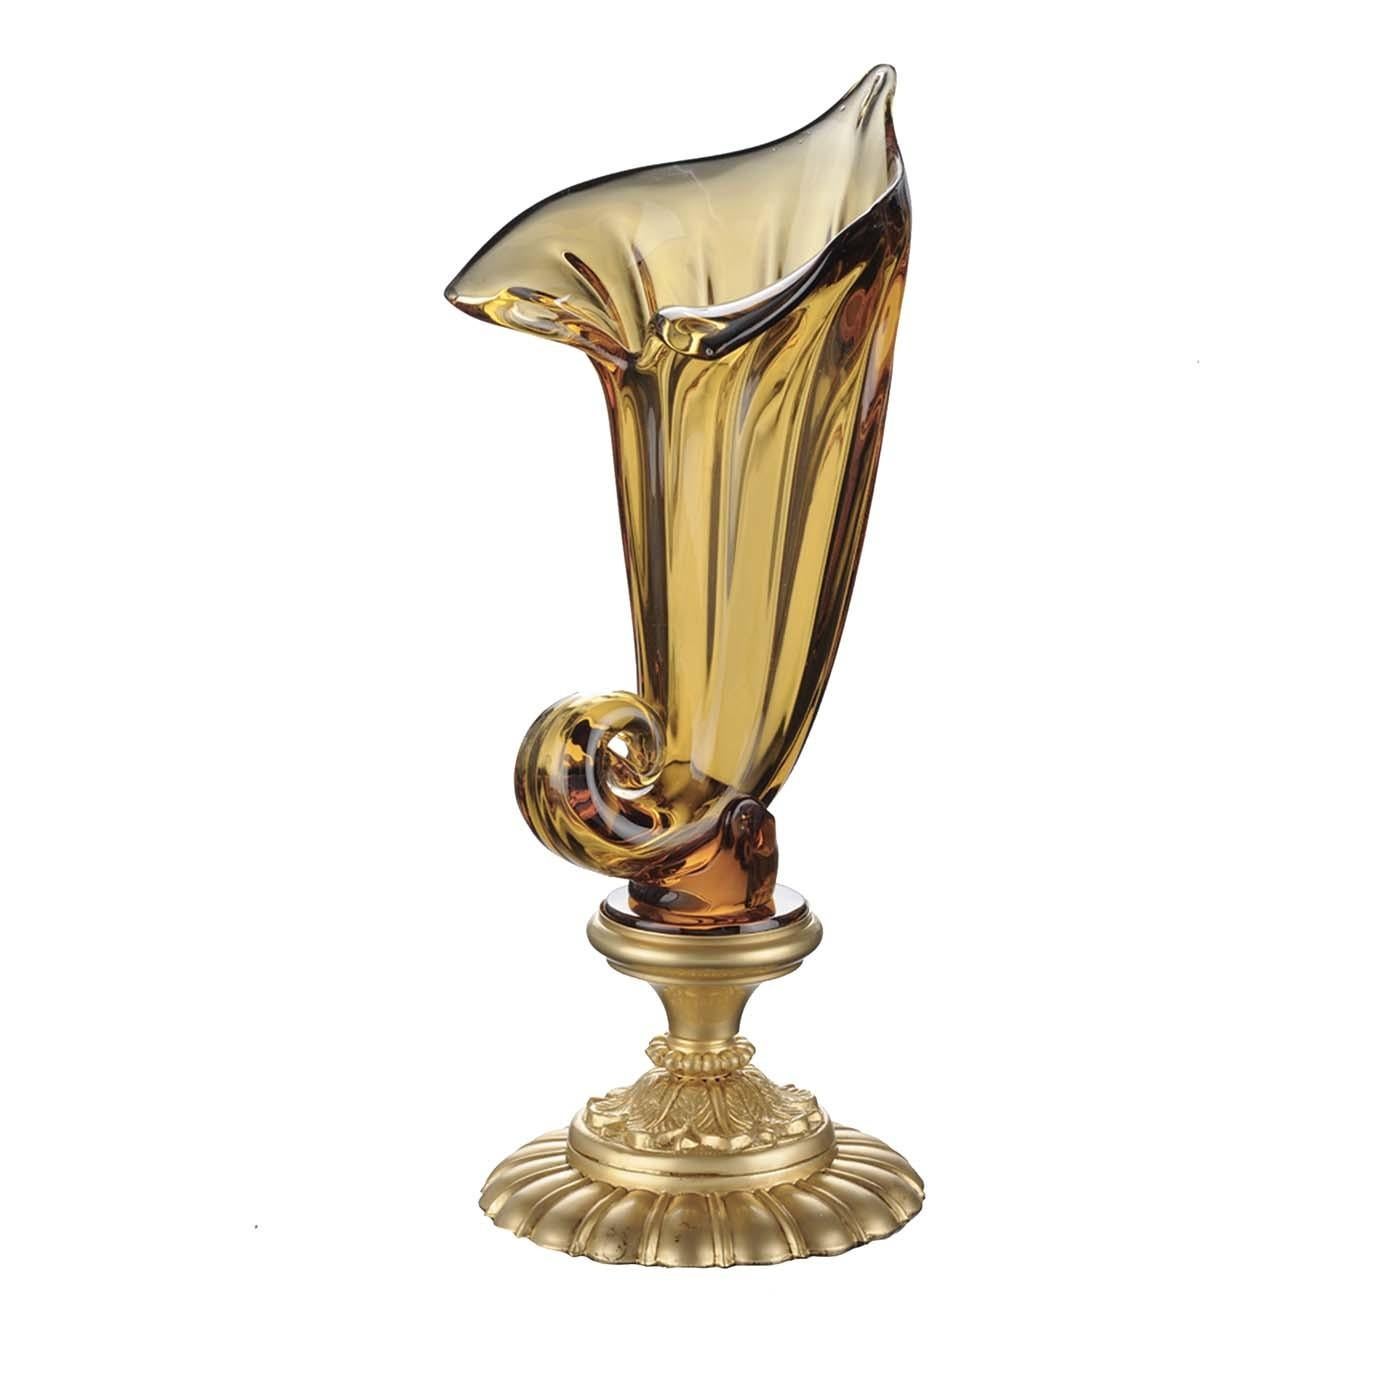 Part of a series of superb vases, this piece of functional decor will enrich a classic interior, thanks to its superb manufacturing and the use of noble materials. The traditionally inspired design features a round base in satin gold-finished bronze